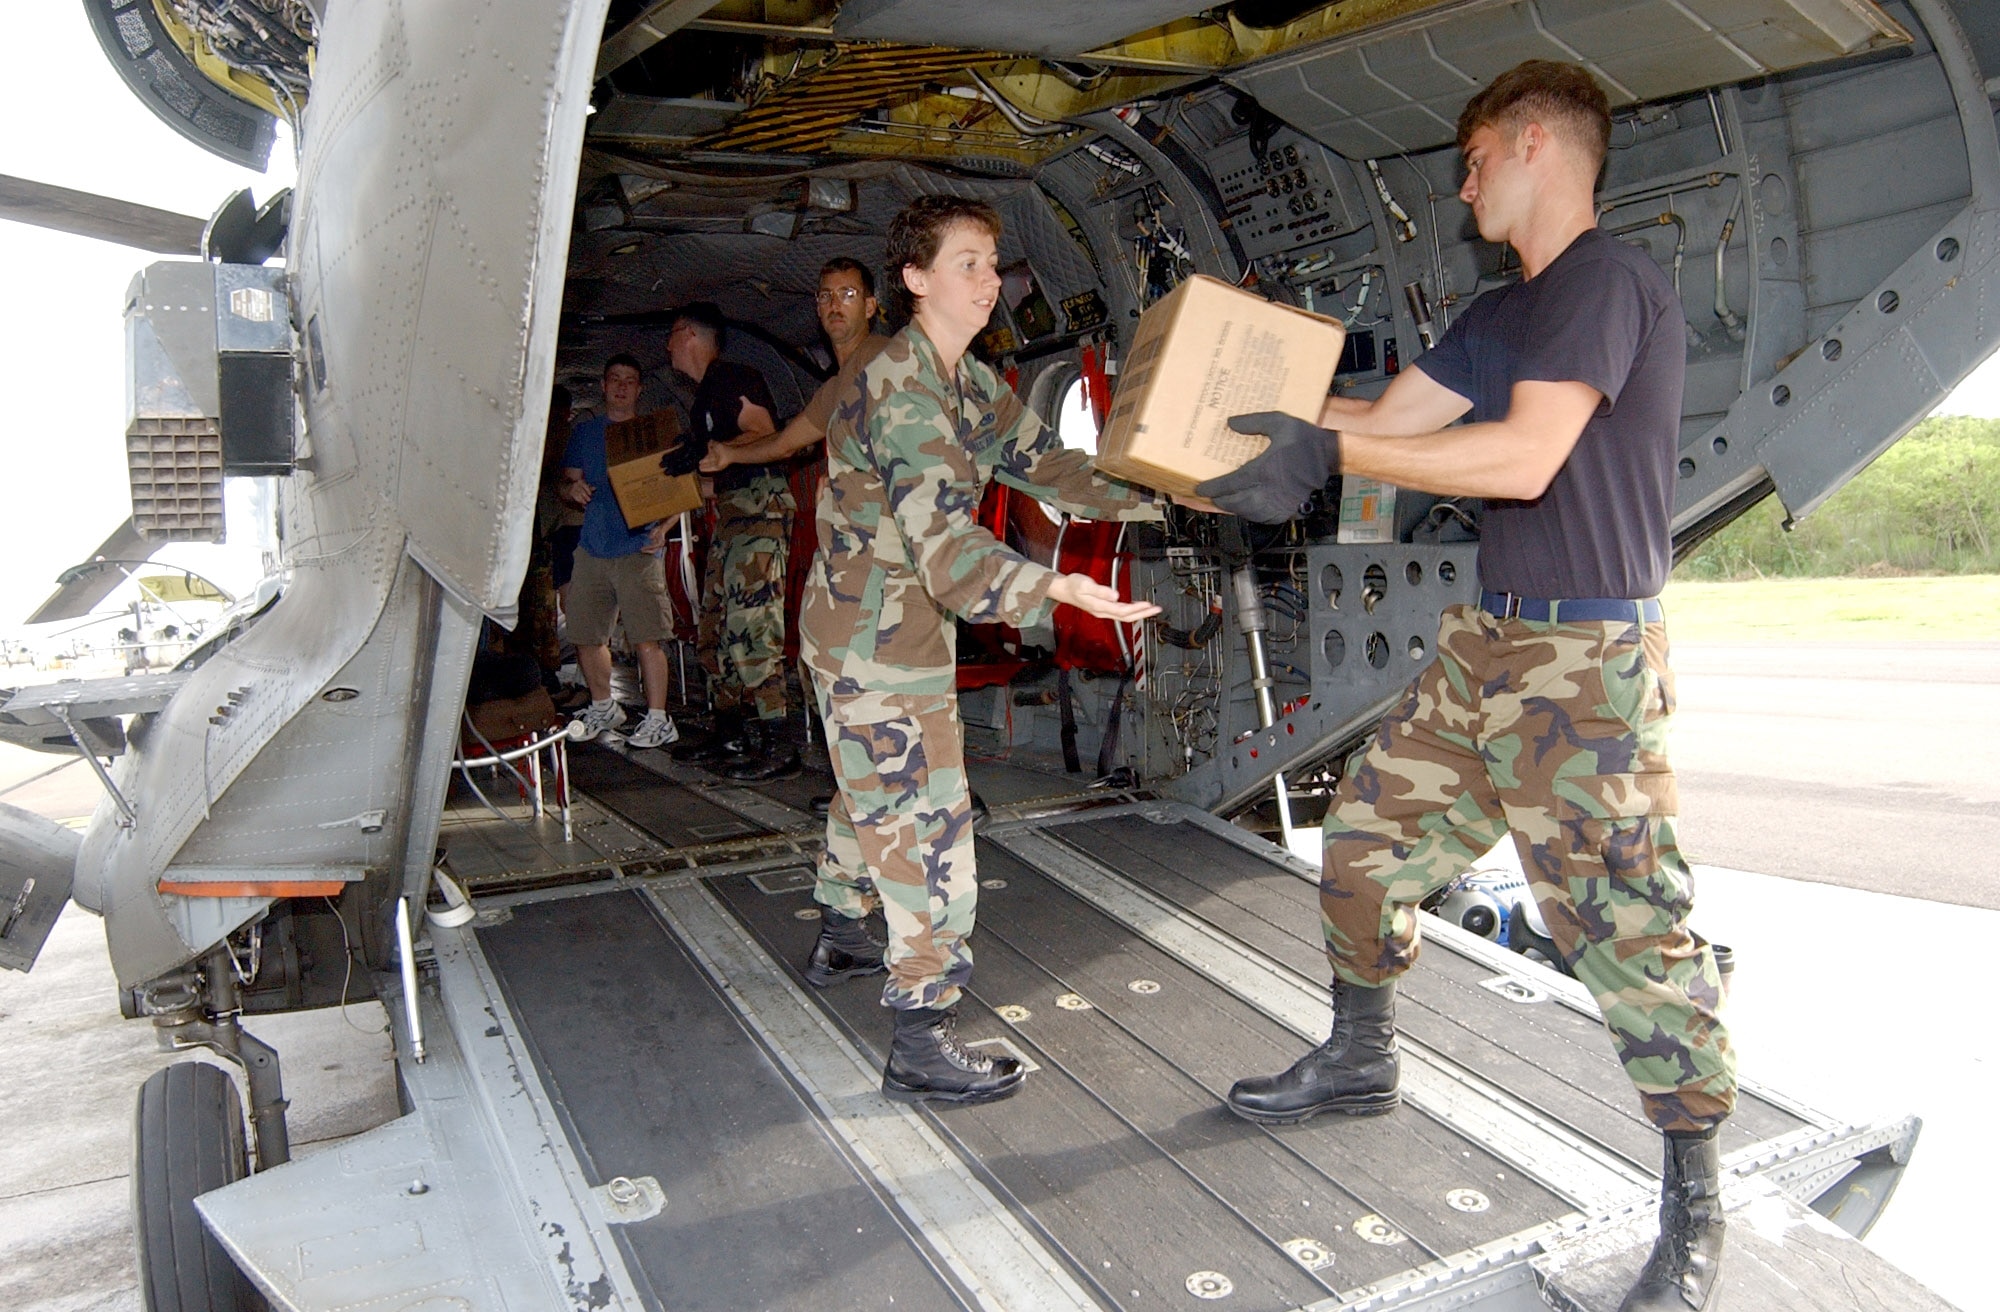 First Lt. Kristina Evener and Senior Airman Ben Hastings help a team of servicemembers load cases of water and Meals, Ready to Eat, into a CH-47 Chinook helicopter Sept. 10. Airmen and Soldiers are responding to a request for help from the U.S. Embassy in Nicaragua after more than 30 people died in the city of Leon from a toxic batch of moonshine laced with methanol. The Airmen are with Joint Task Force Bravo's Air Force Forces logistics flight. (U.S. Air Force photo/Senior Airman Mike Meares)